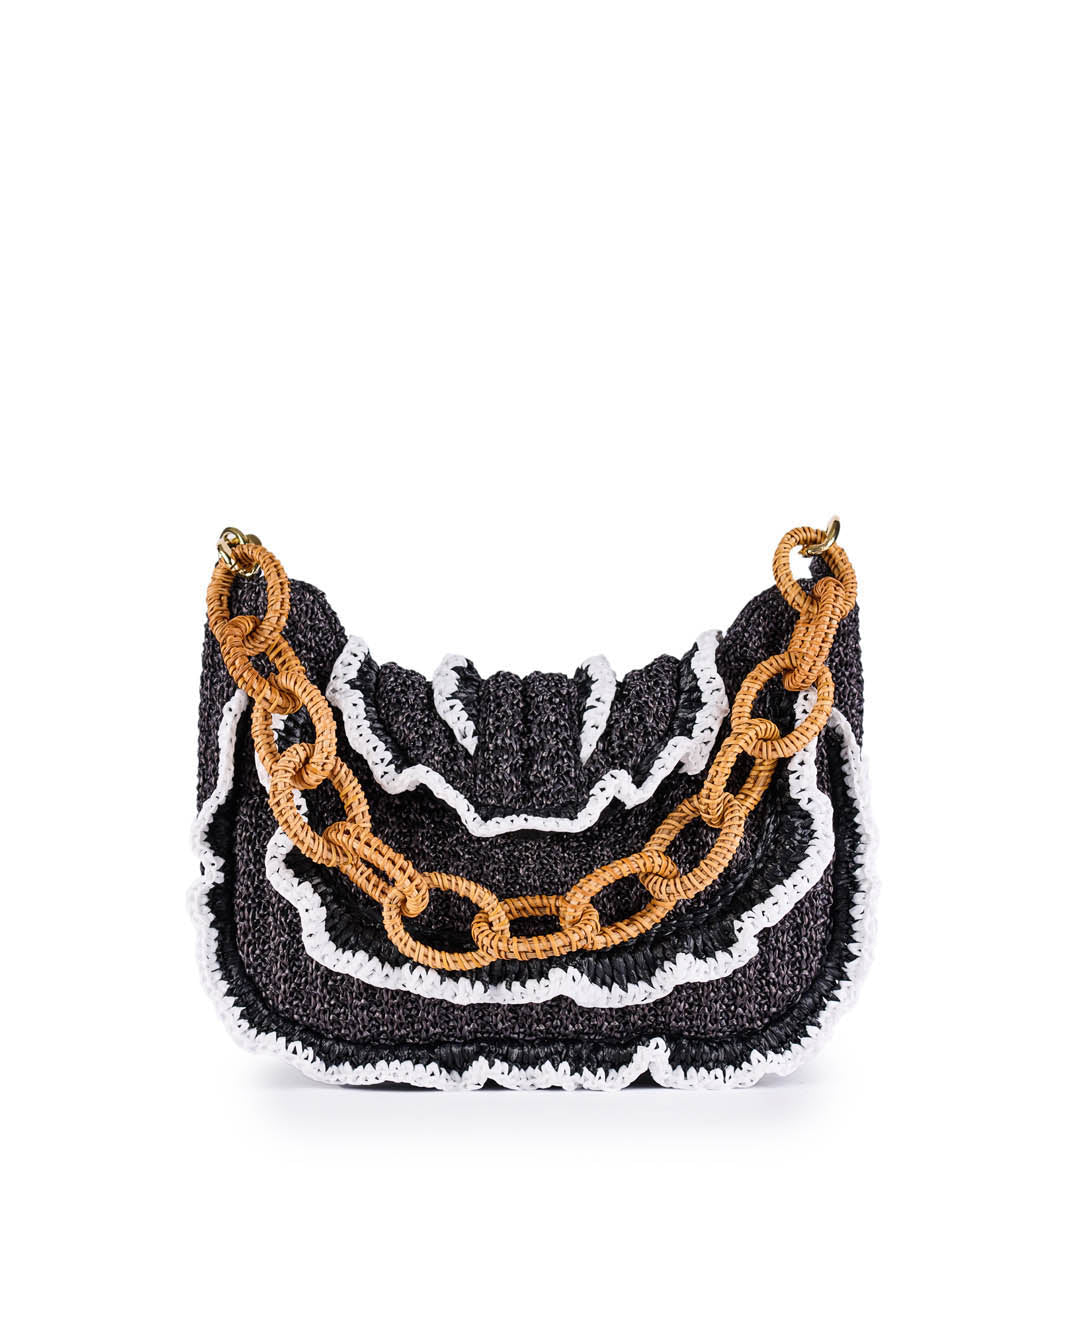 Black crochet handbag with white ruffles and large gold chain handle